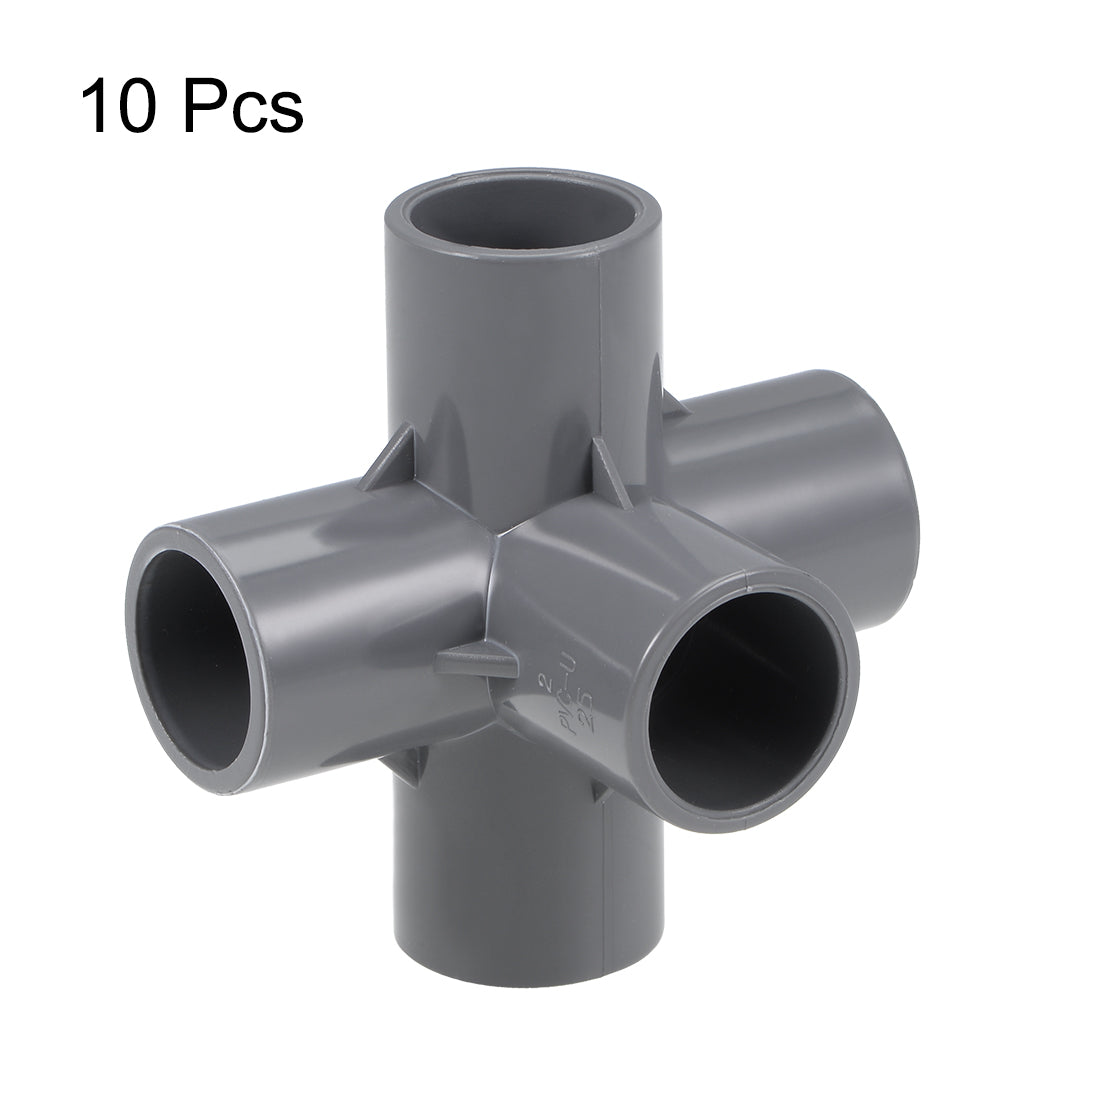 uxcell Uxcell 5 Way 25mm Tee Metric PVC Fitting Elbow - PVC Furniture Elbow Fittings Gray 10Pcs